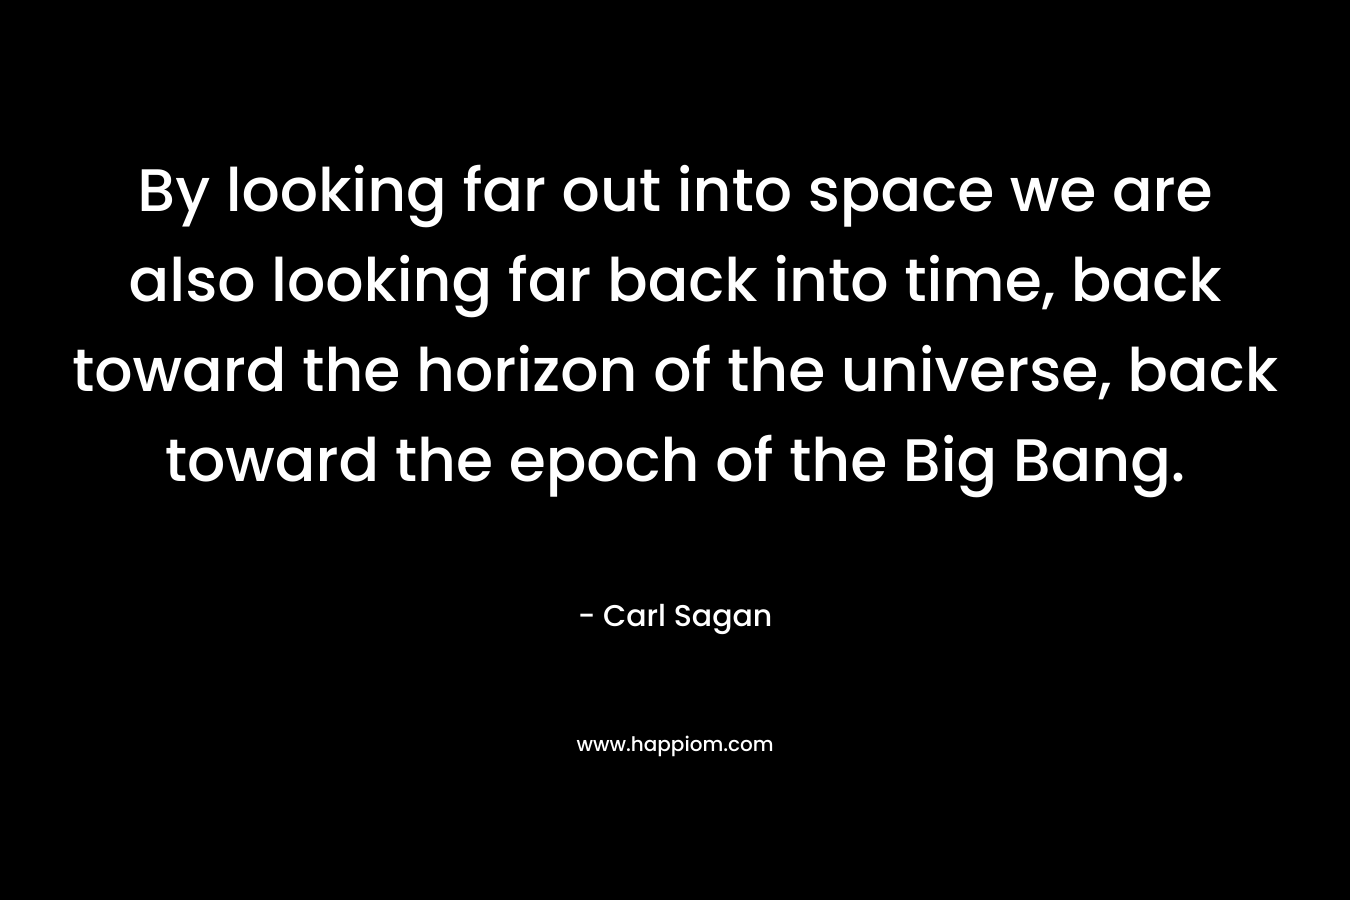 By looking far out into space we are also looking far back into time, back toward the horizon of the universe, back toward the epoch of the Big Bang.